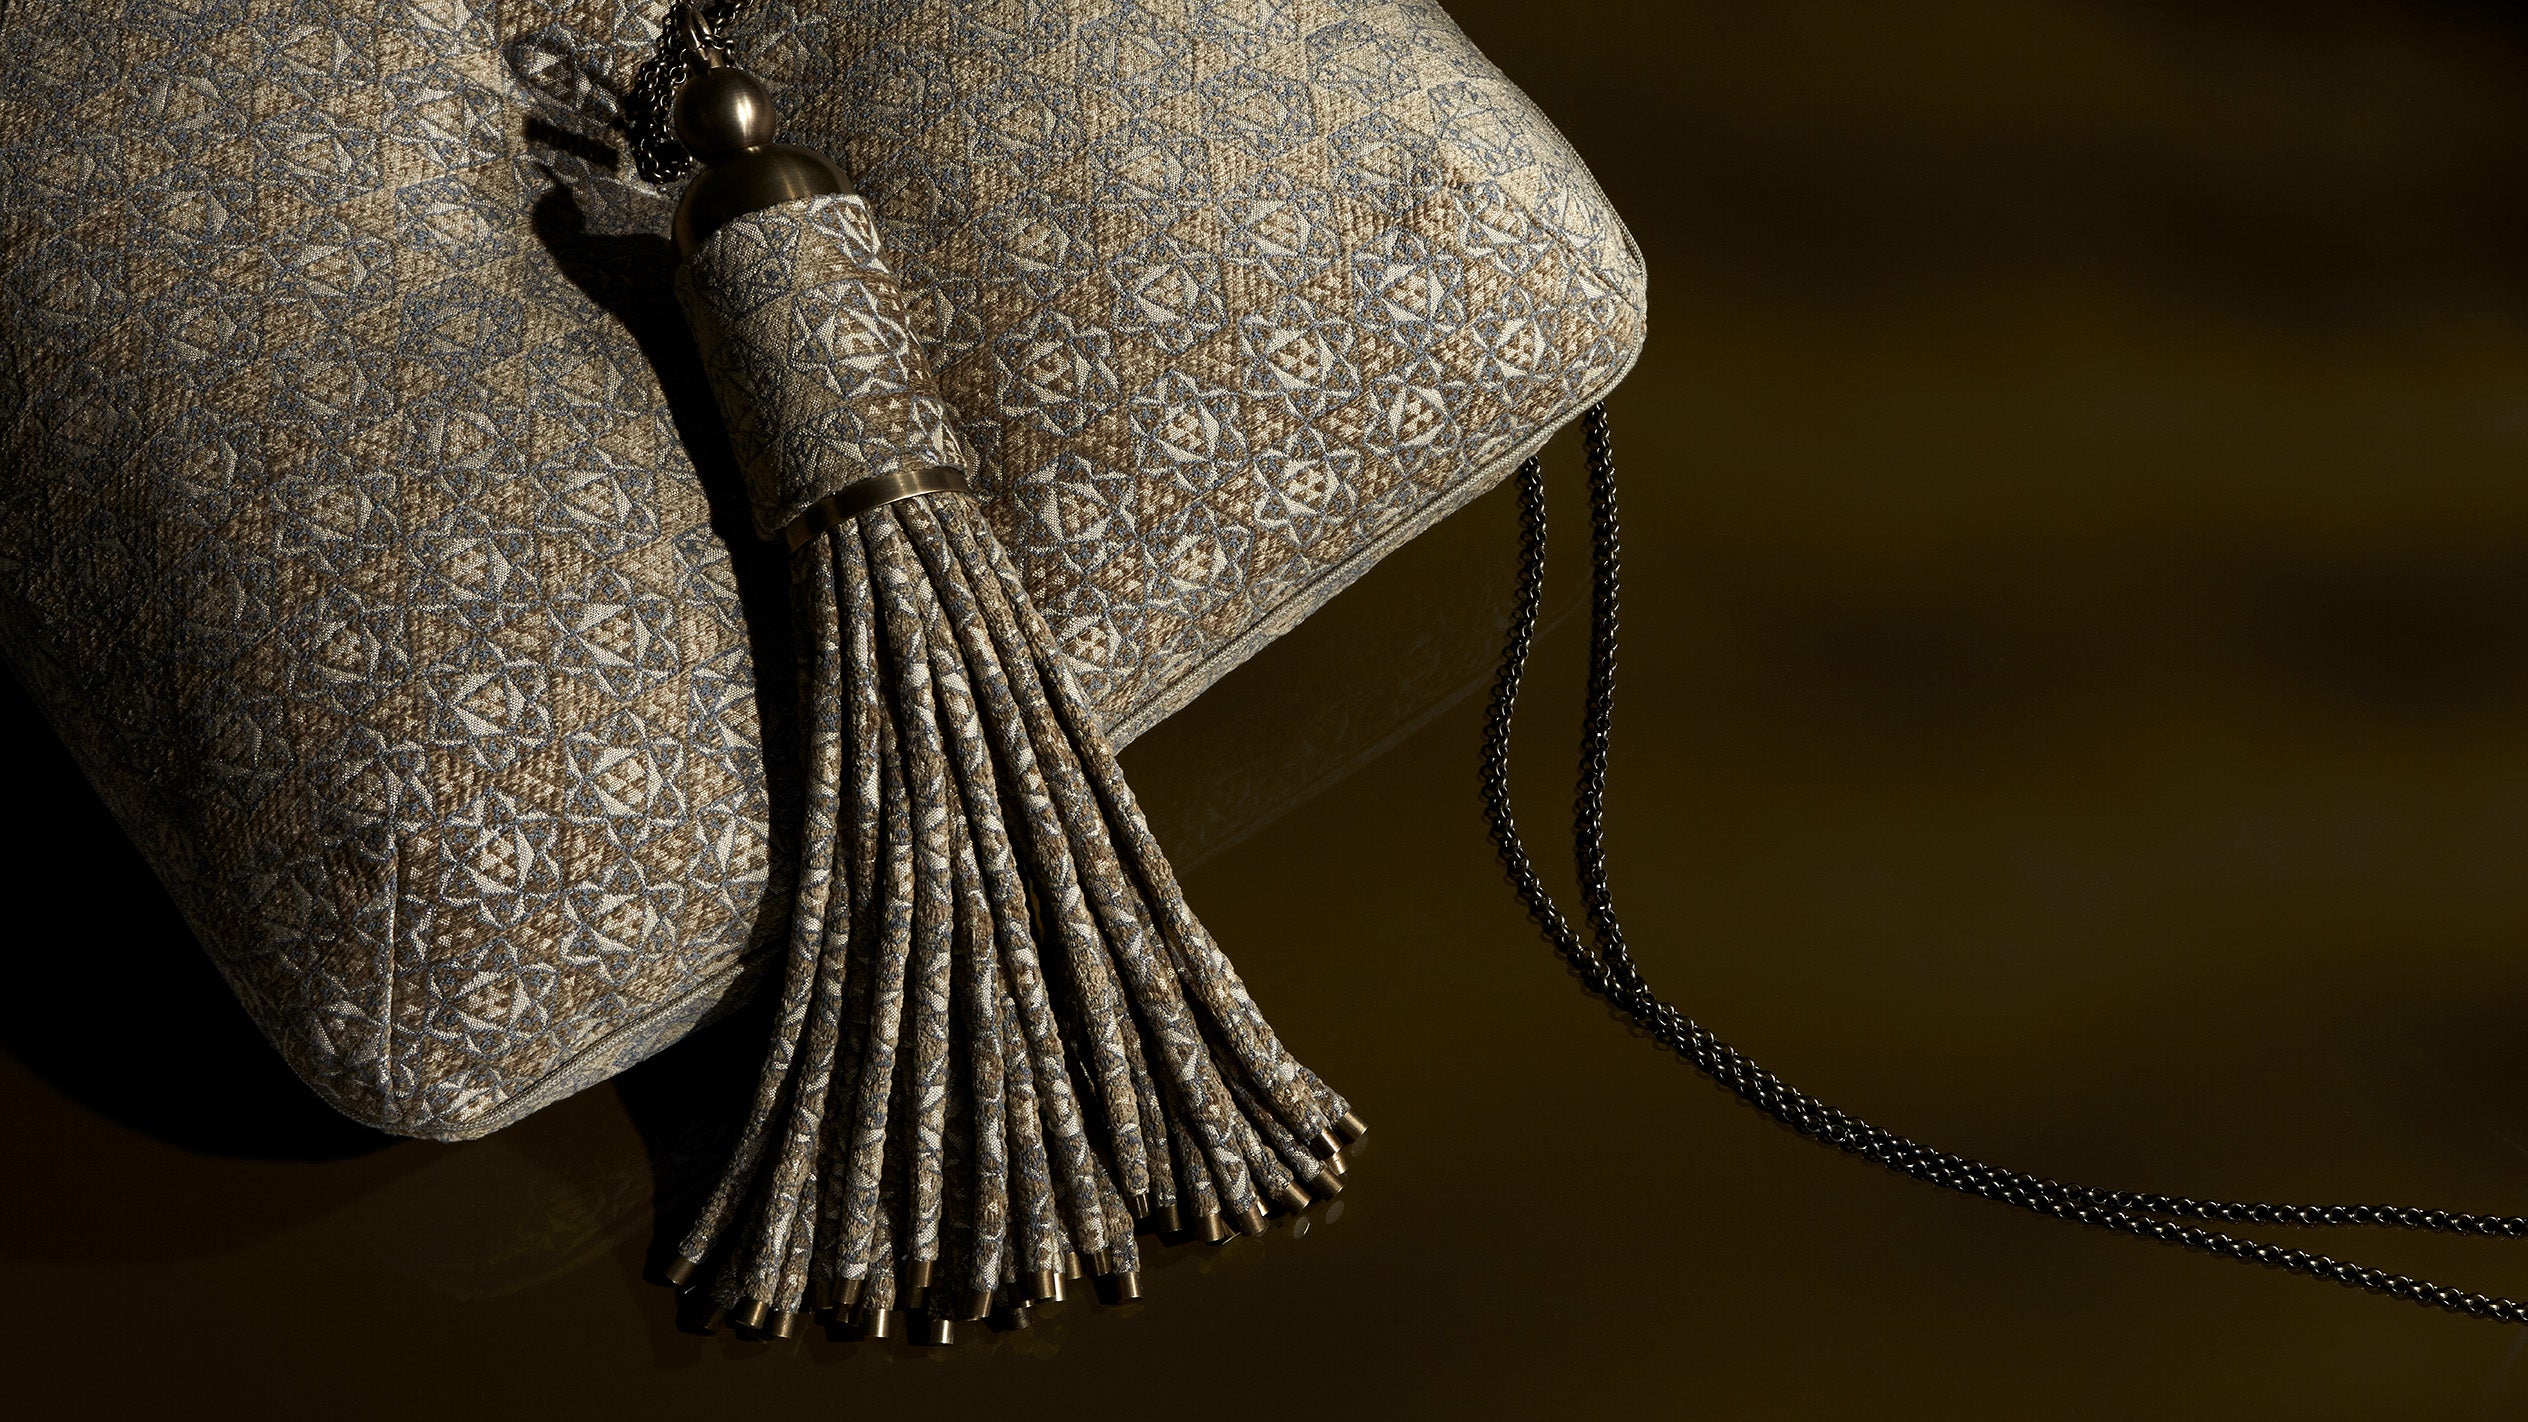 Close up of an upholstered cushion with a large tassel.